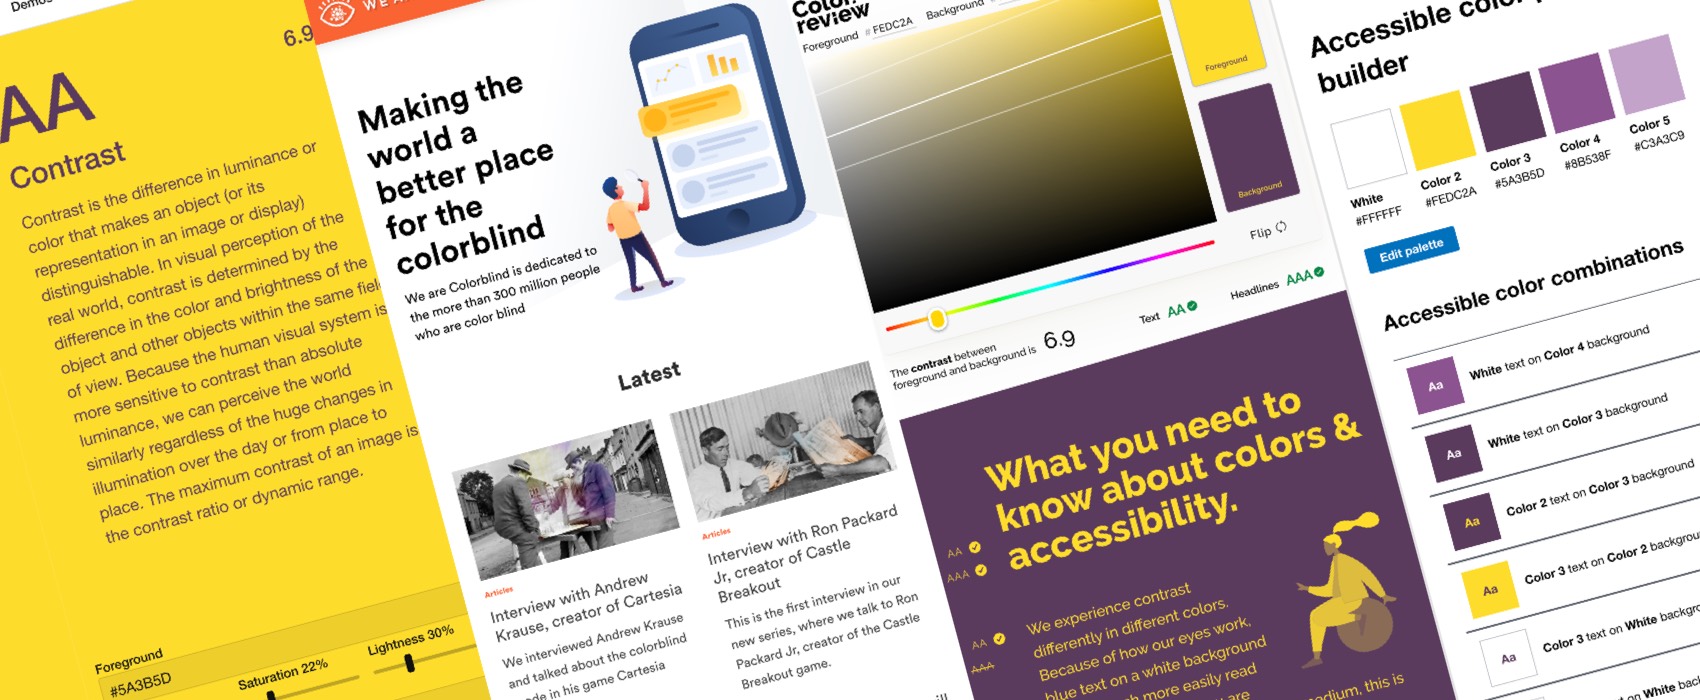 Color accessibility: tools and resources to help you design inclusive products